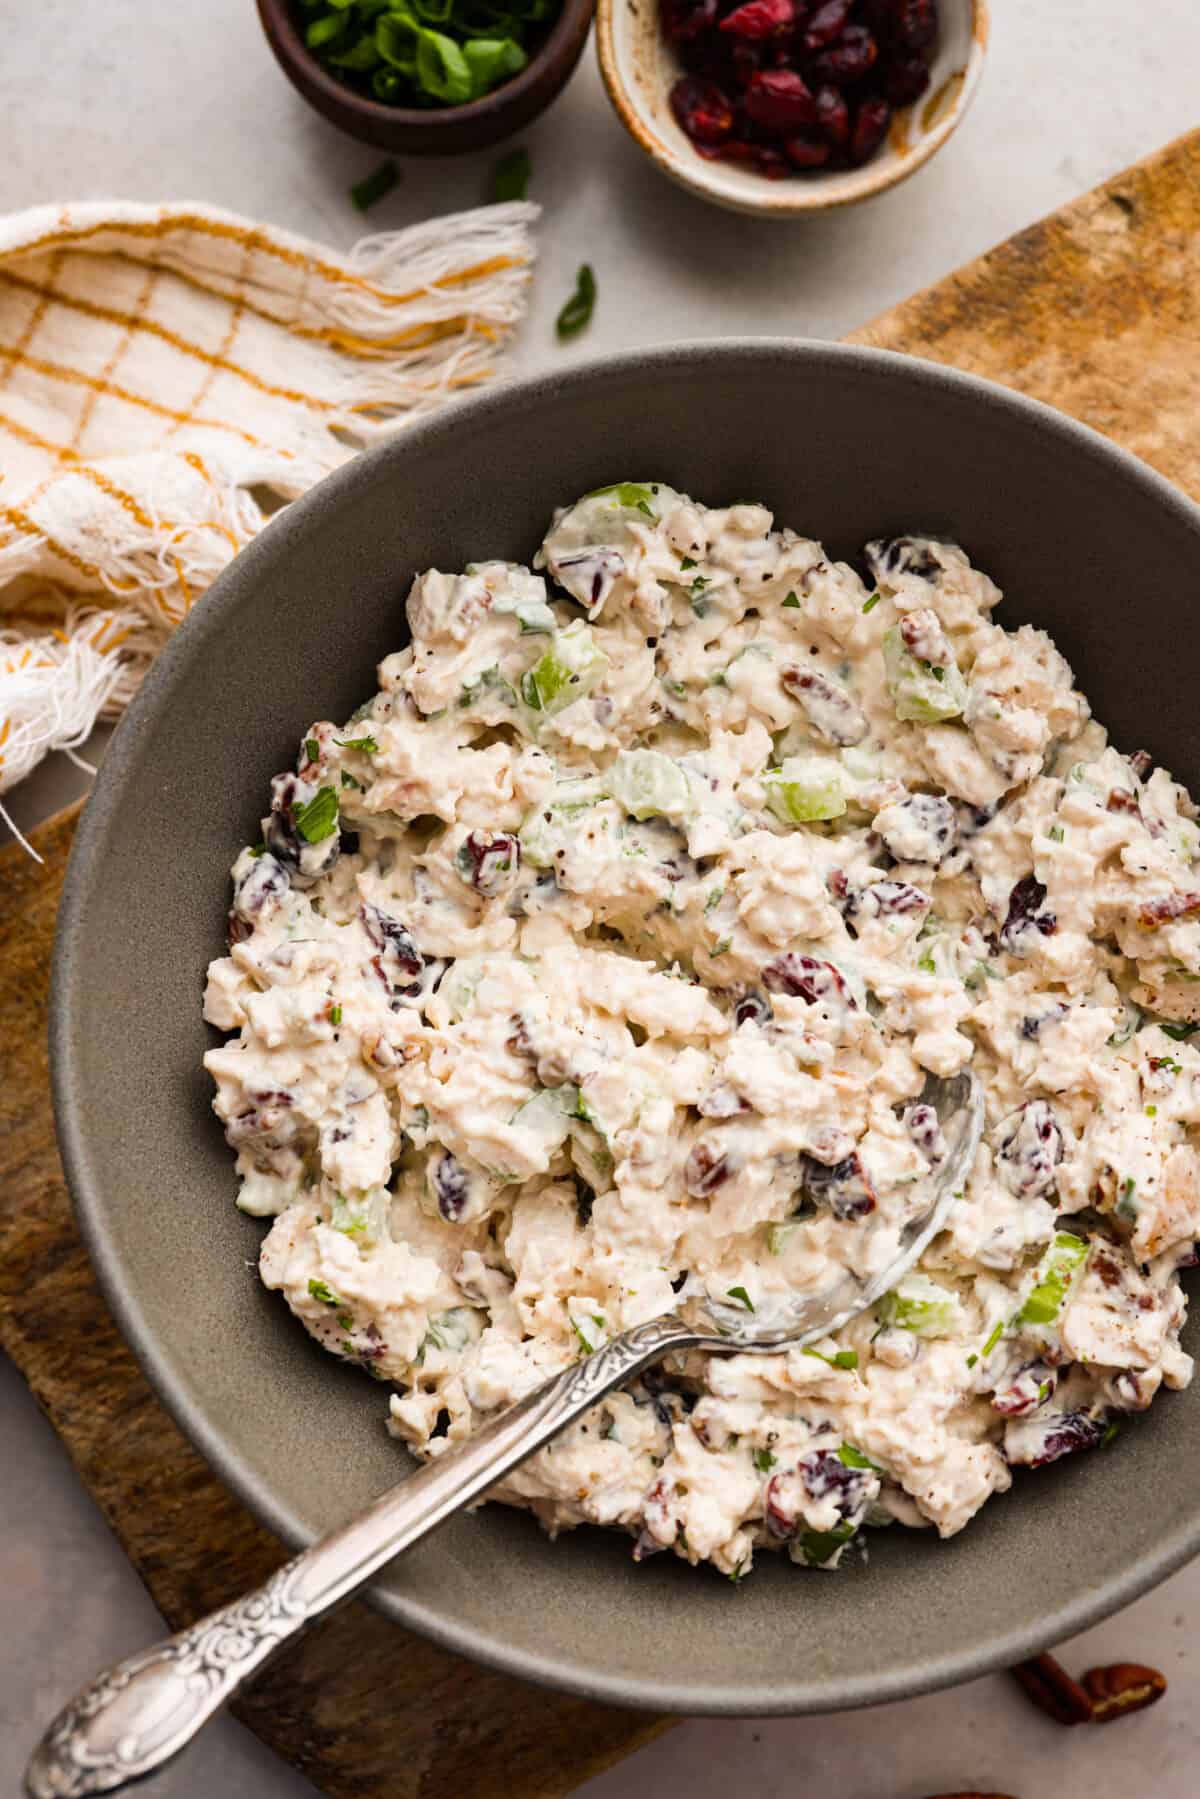 Turkey salad served in a gray bowl.